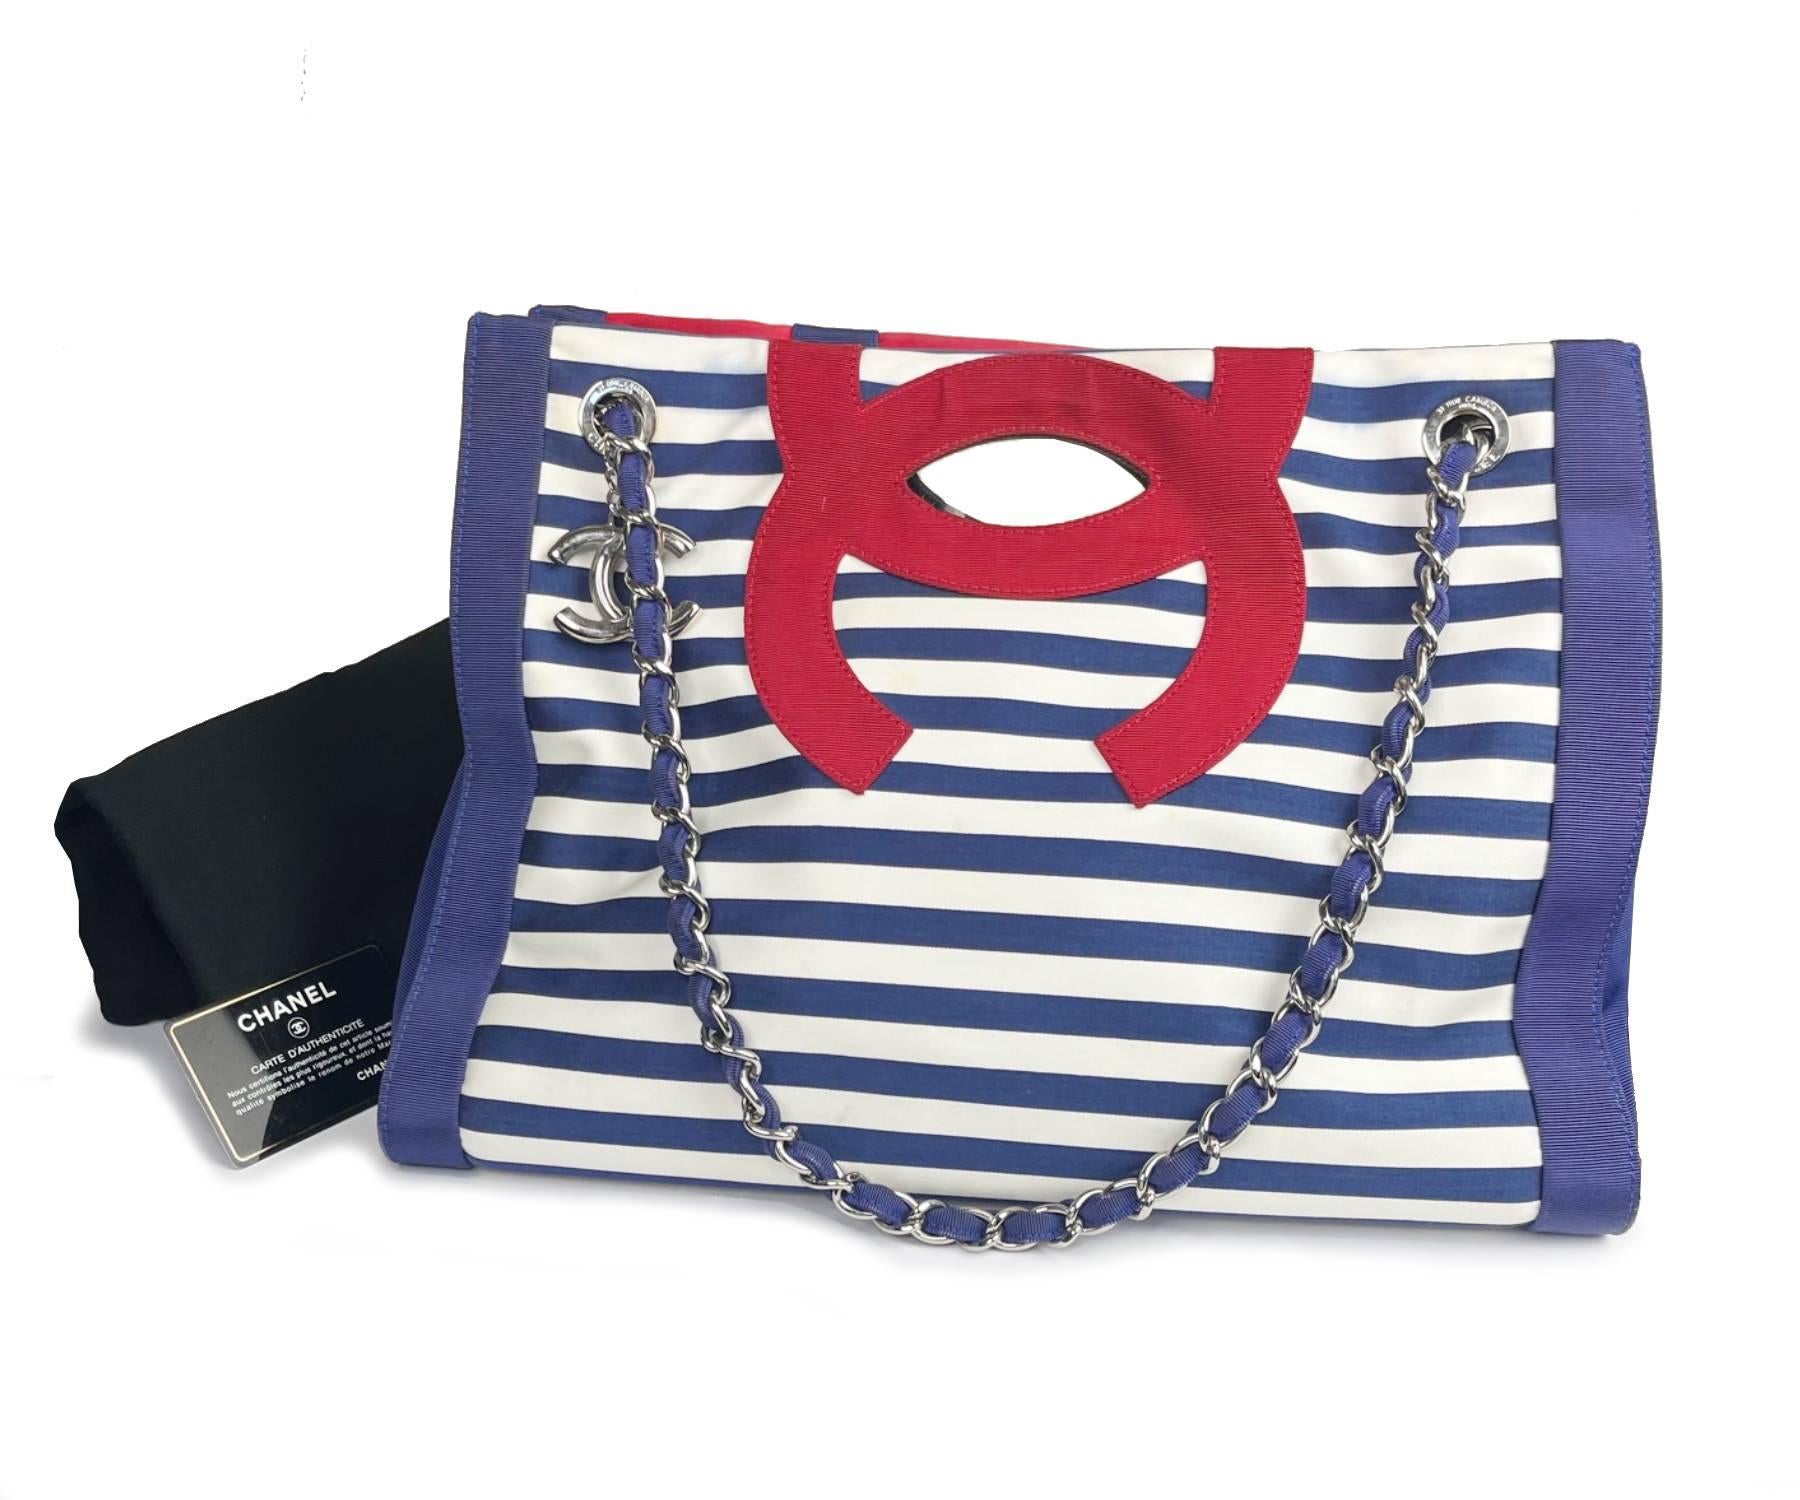 Chanel Rare Blue Red CC Handle Stripe 3 way Bag

* 1319 xxxx
* Made in Italy
*Comes with the dustbag and control number card

-Approximately 7″x 5.5″x 2.5″
-The drop length of the shoulder strap is approximately 9.5″ to 16.5″
-Some parts of the